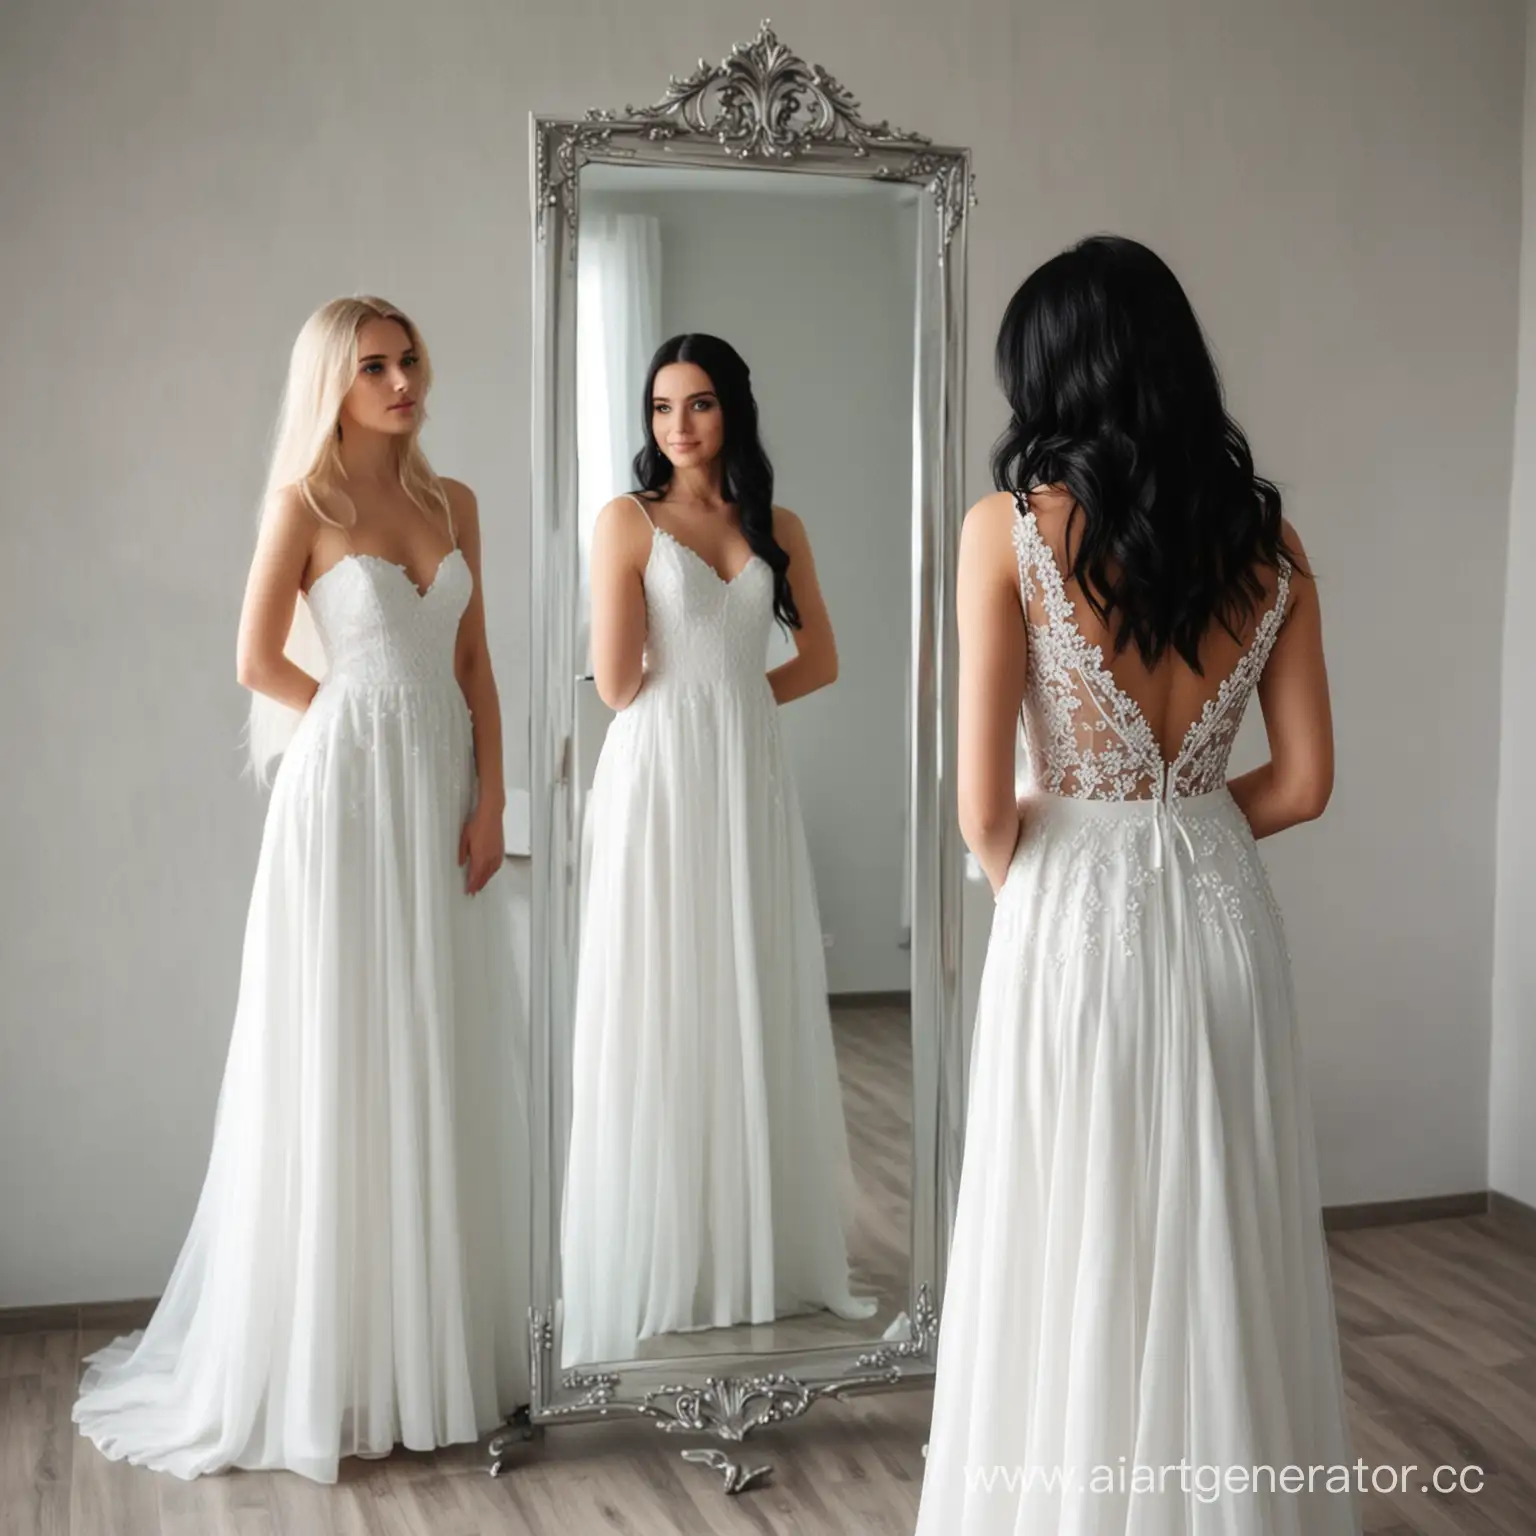 Blonde-Bride-and-Brunette-Bridesmaid-Admiring-Reflections